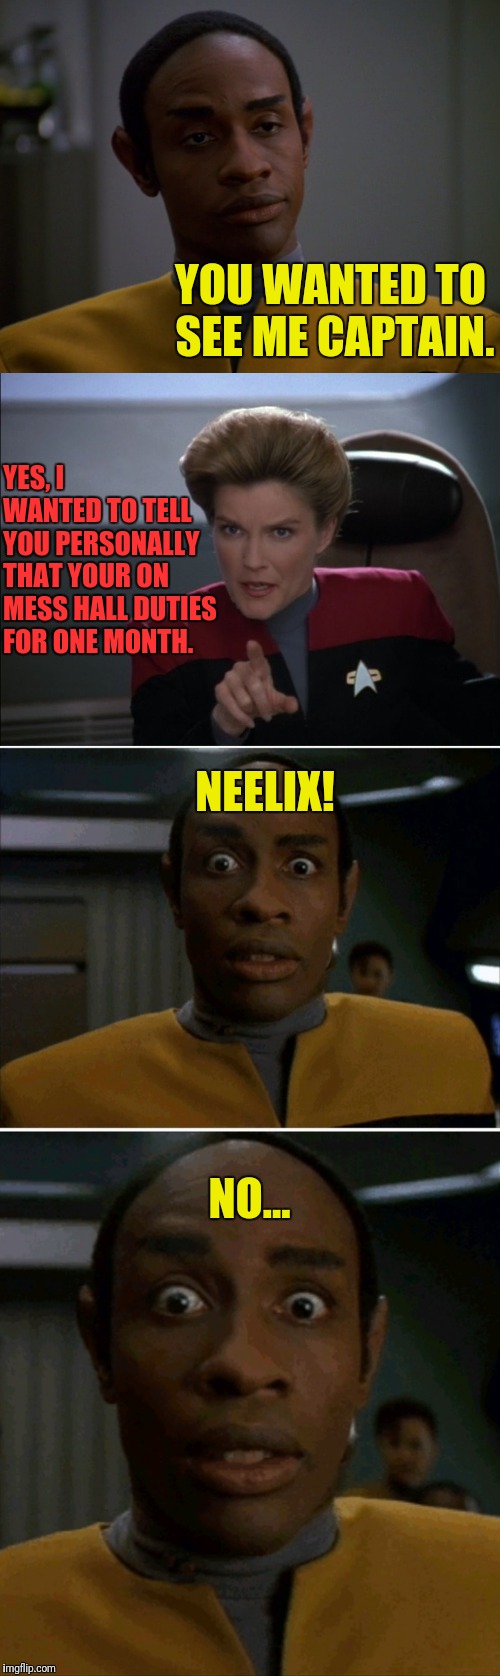 Punishment For Tuvok | YOU WANTED TO SEE ME CAPTAIN. YES, I WANTED TO TELL YOU PERSONALLY THAT YOUR ON MESS HALL DUTIES FOR ONE MONTH. NEELIX! NO... | image tagged in star trek voyager,janeway,mess | made w/ Imgflip meme maker